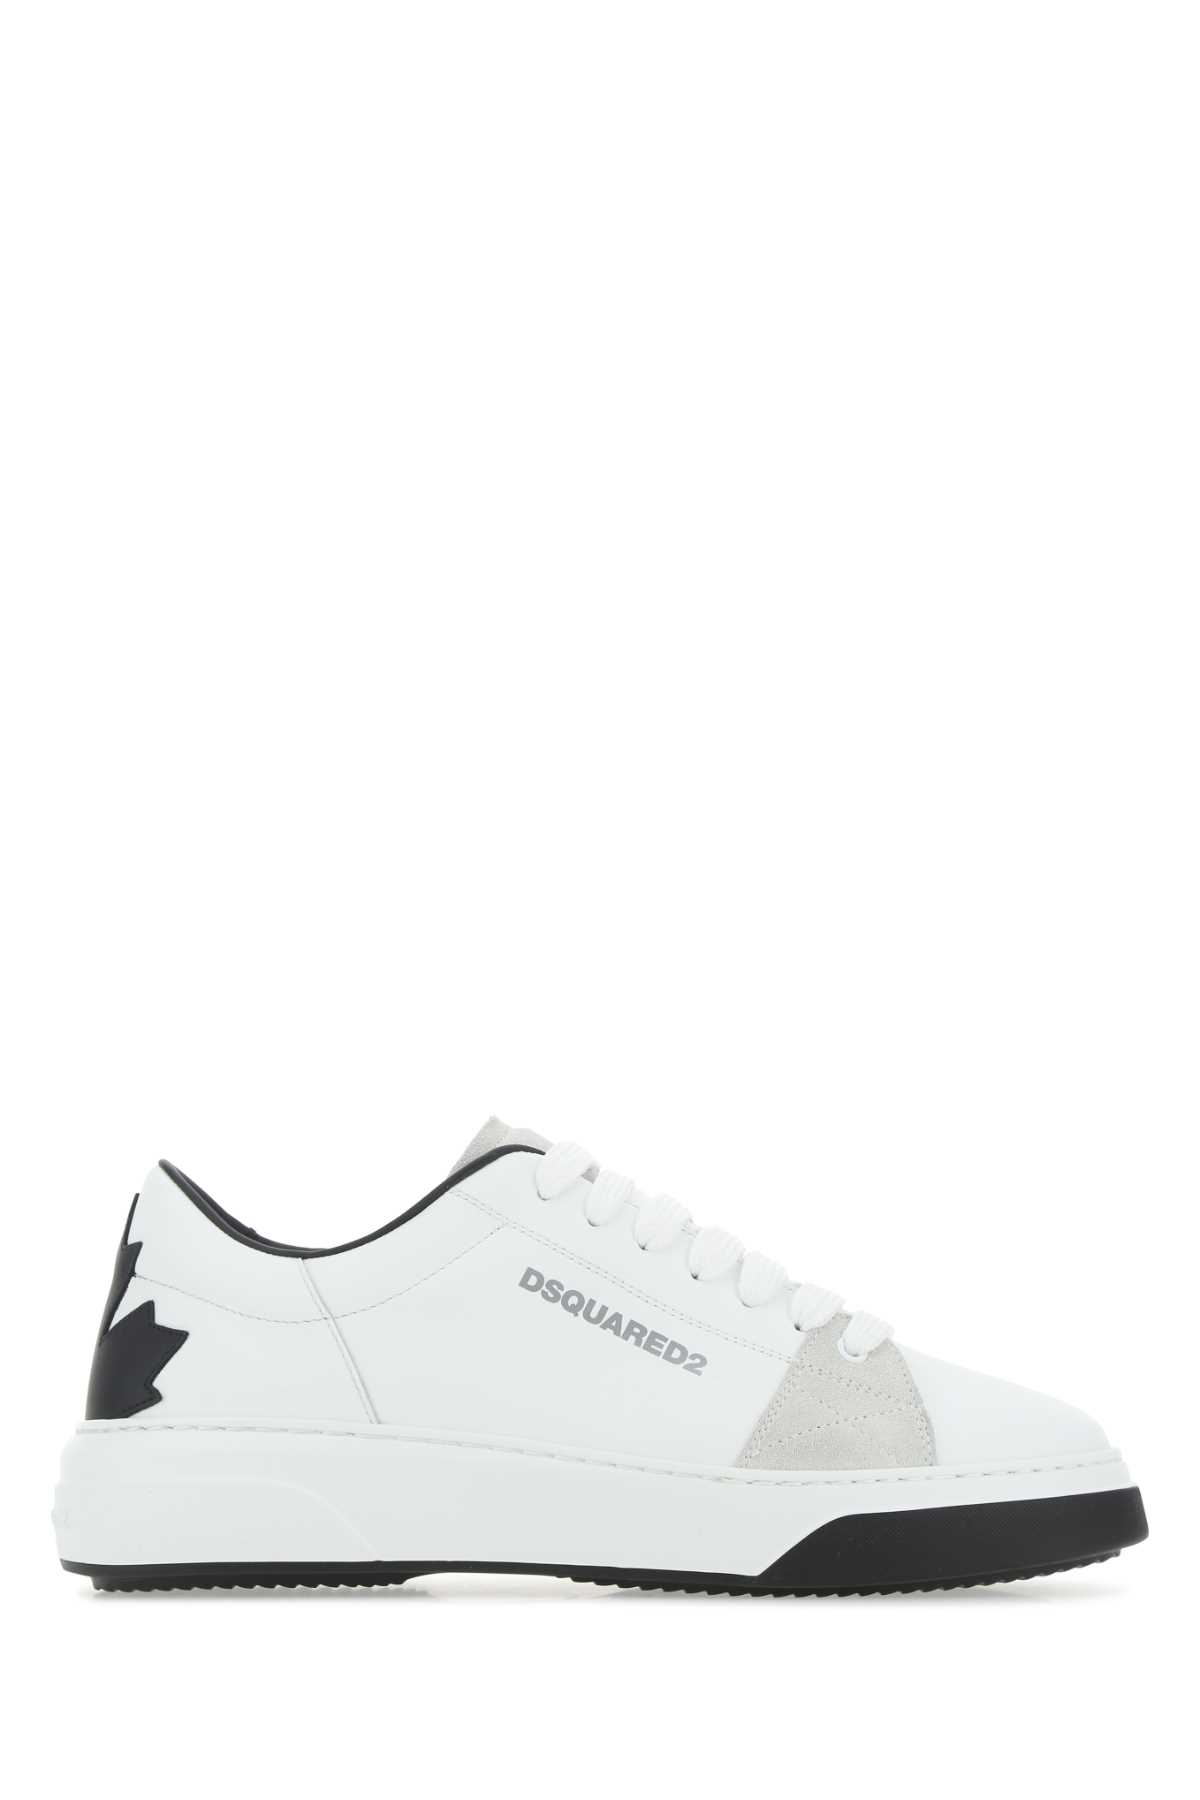 DSQUARED2 TWO-TONE LEATHER BUMPER SNEAKERS